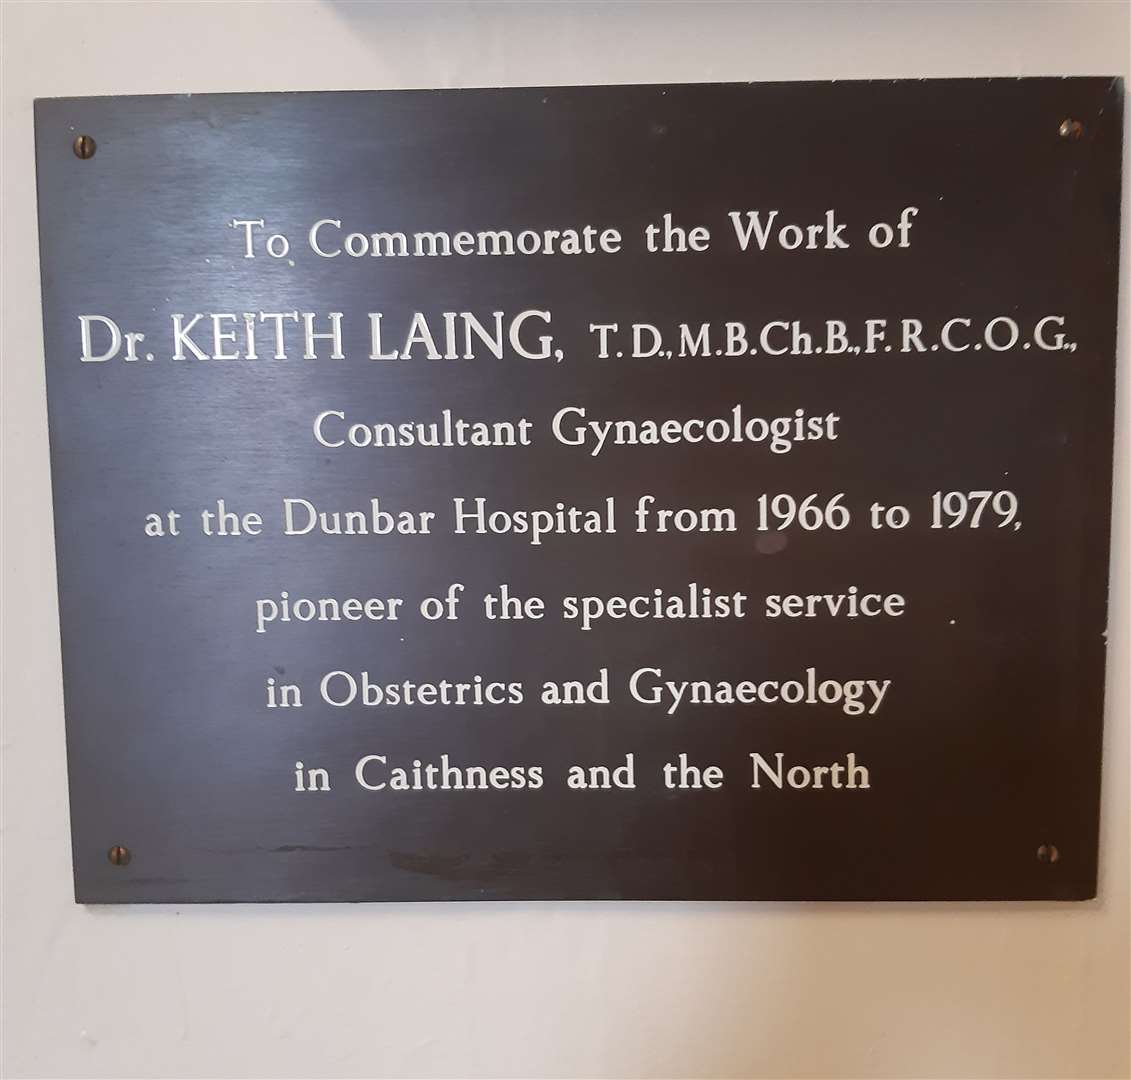 Councillor Matthew Reiss sent this photo of a Dunbar Hospital plaque to NHS Highland as 'a reminder of what services used to be routinely provided in Thurso'.